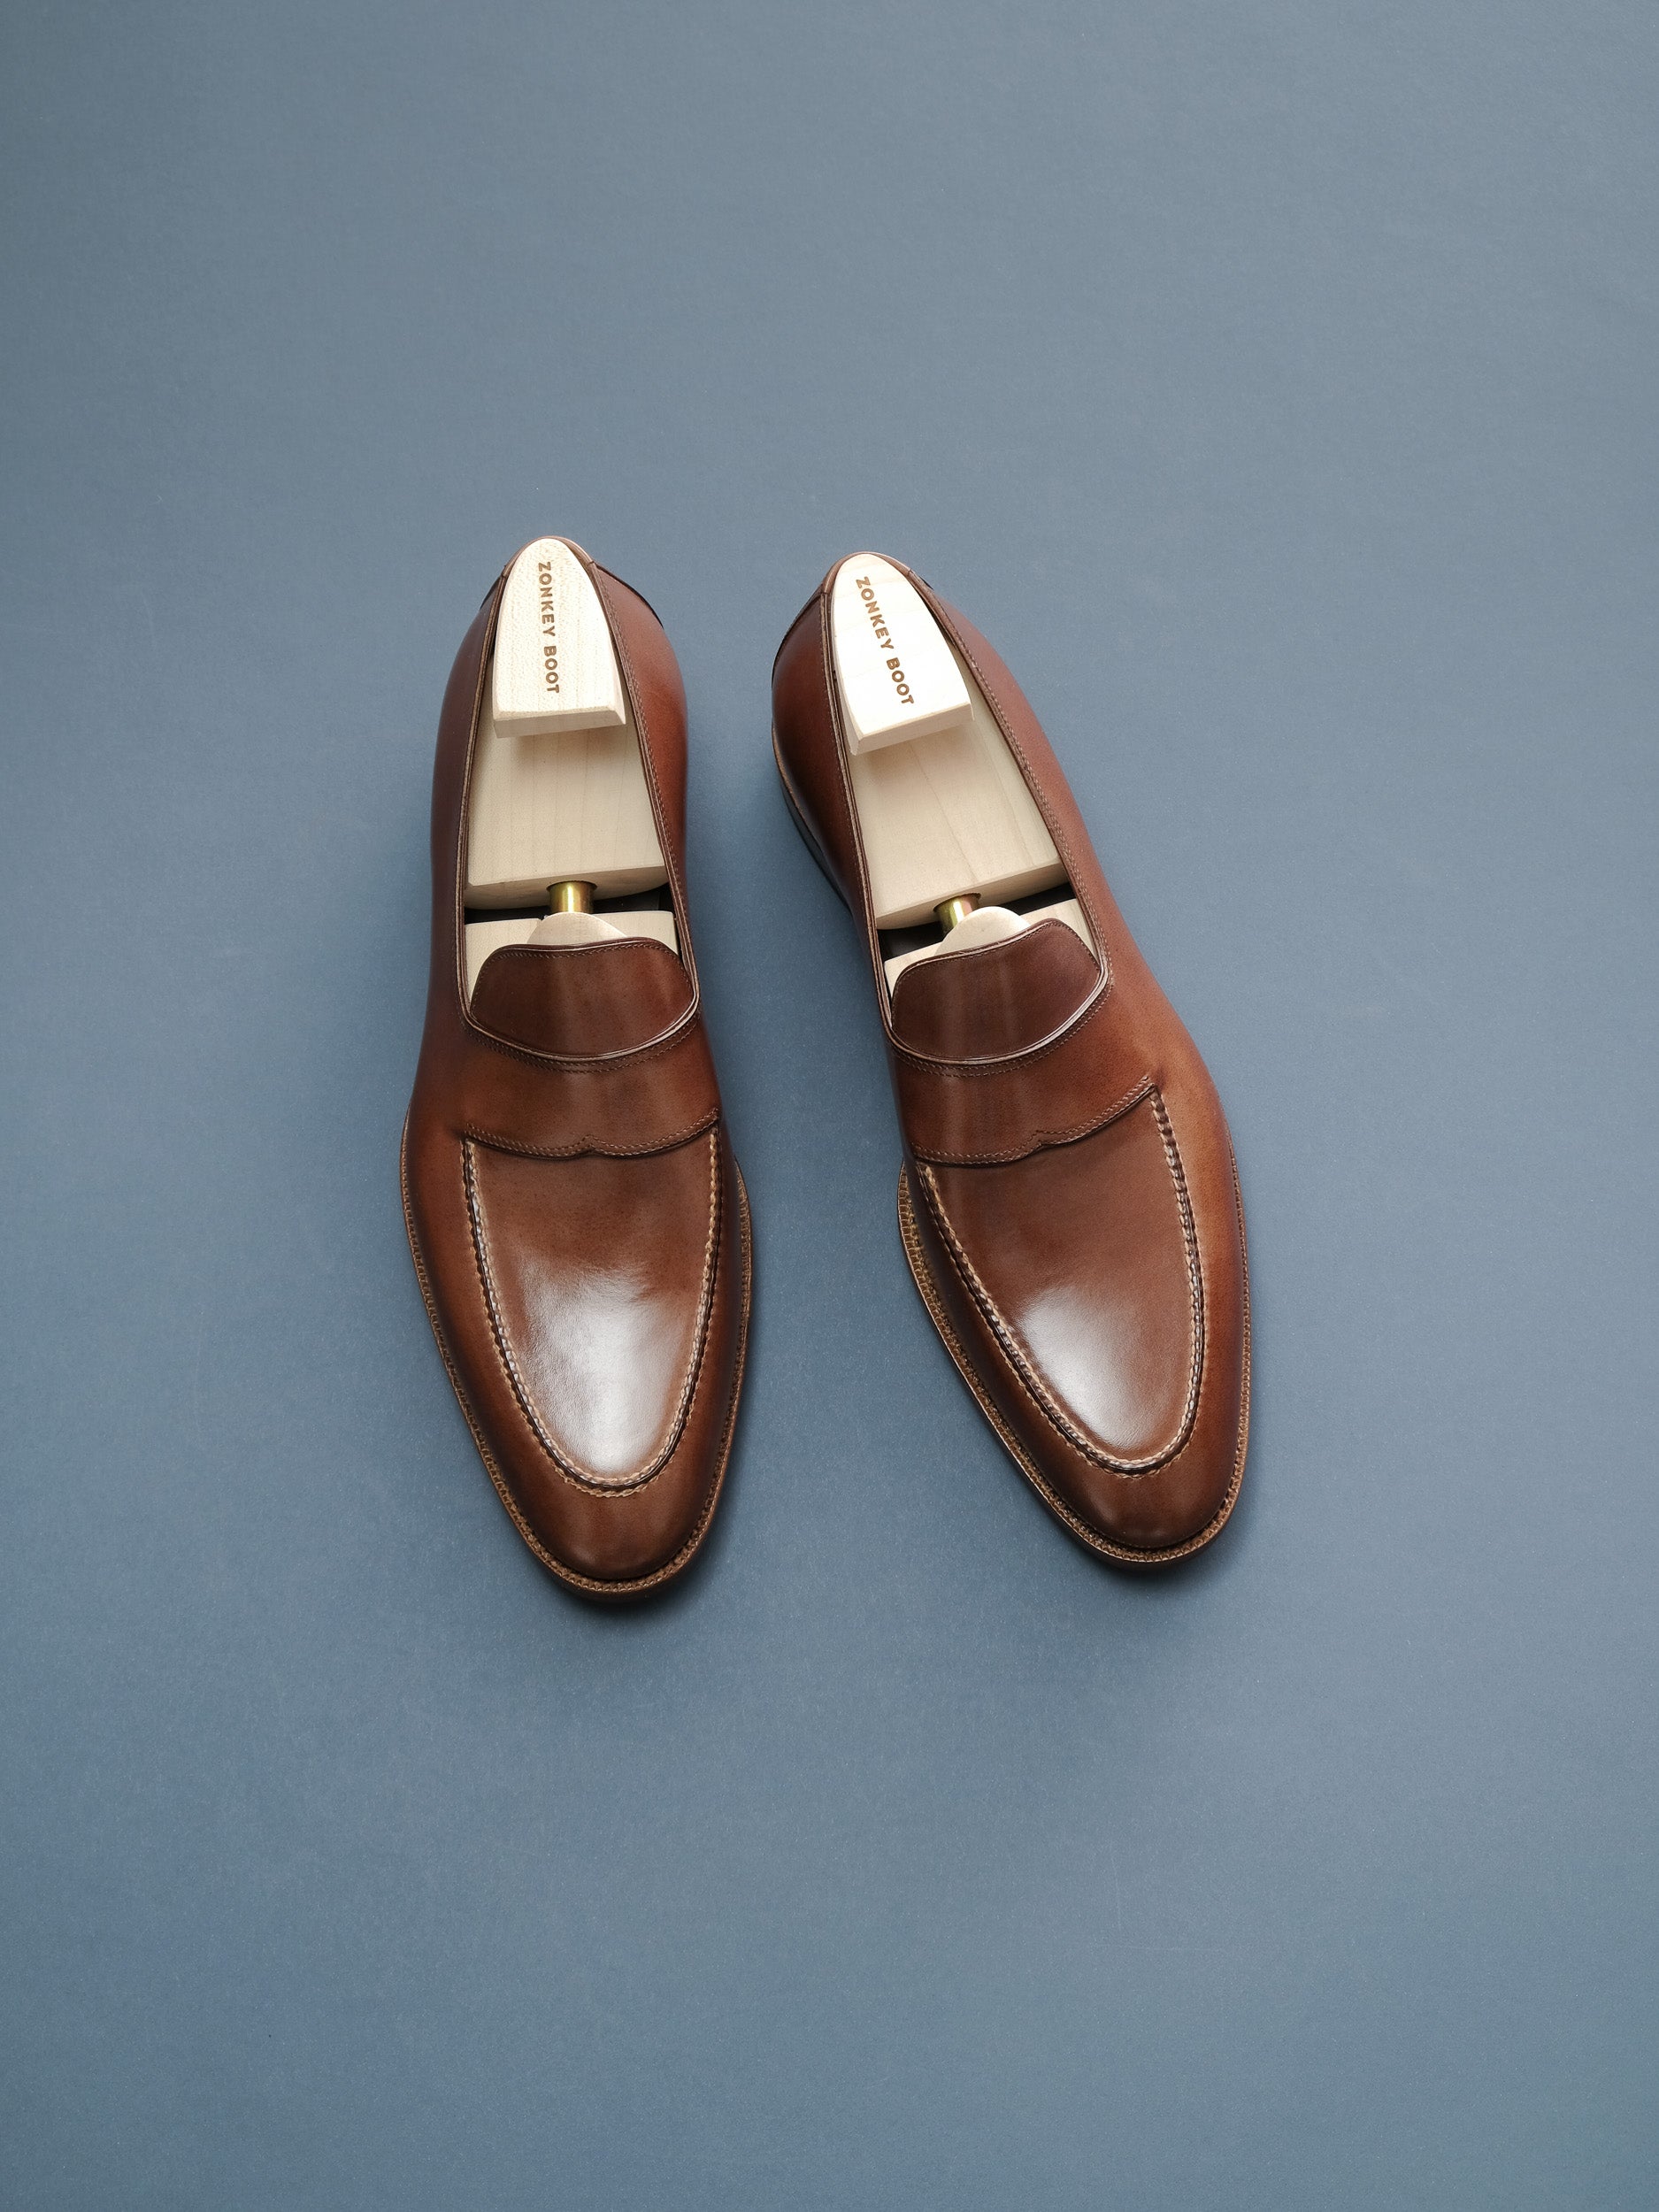 Zonkey Boot hand welted classic loafers with hand sewn aprons